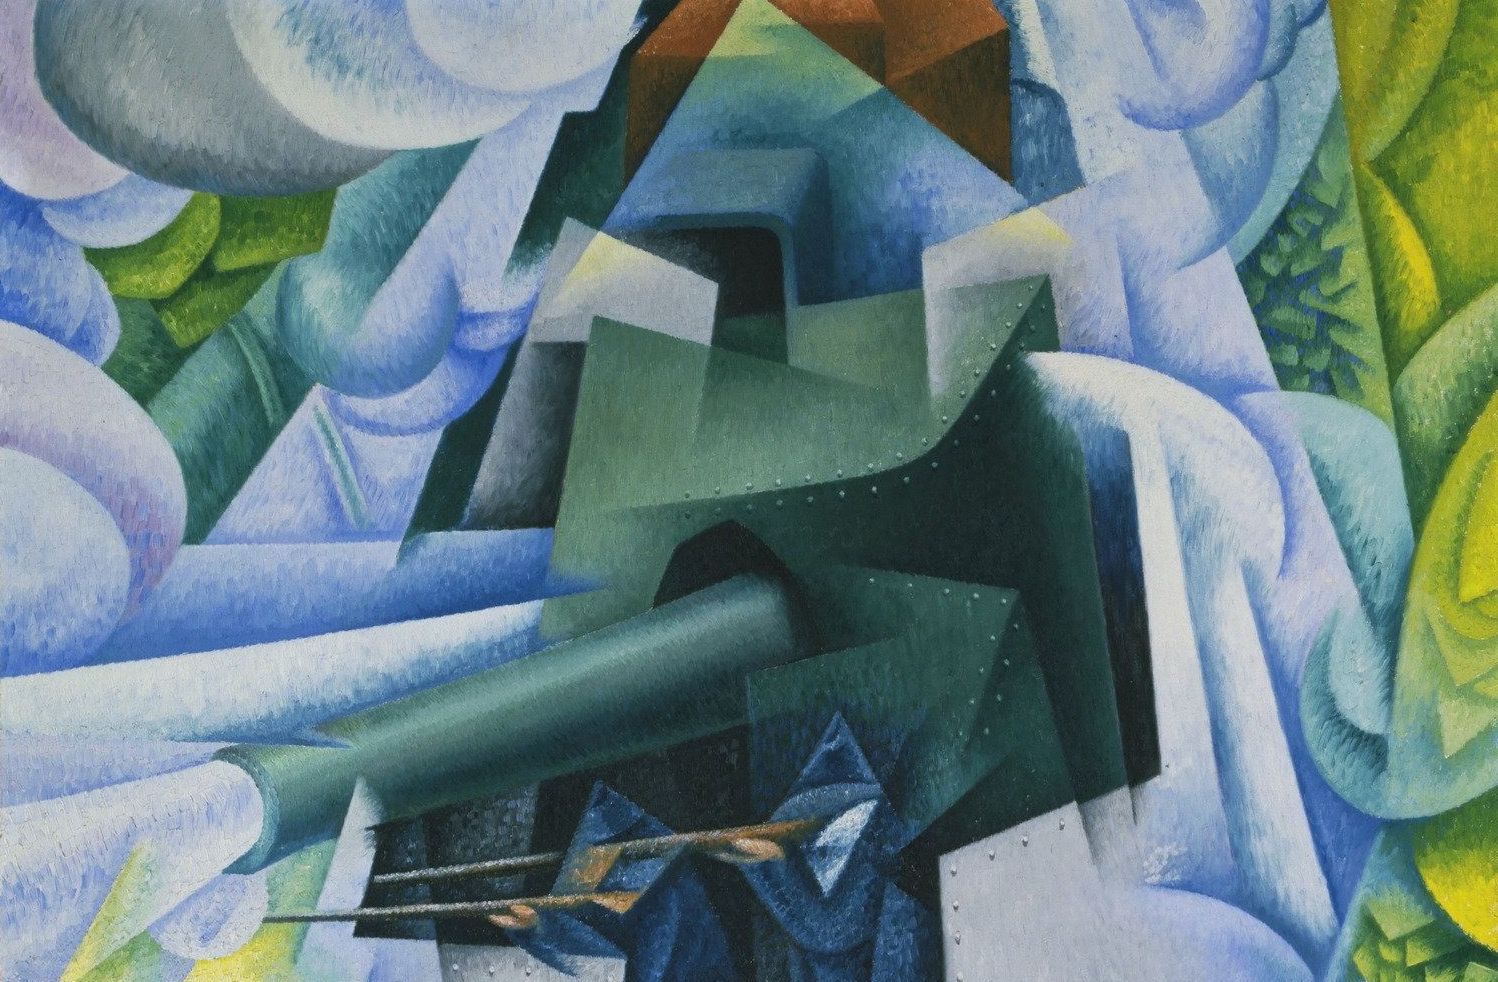 Painting - Armored Train in Action, Detail by Gino Severini (1915)